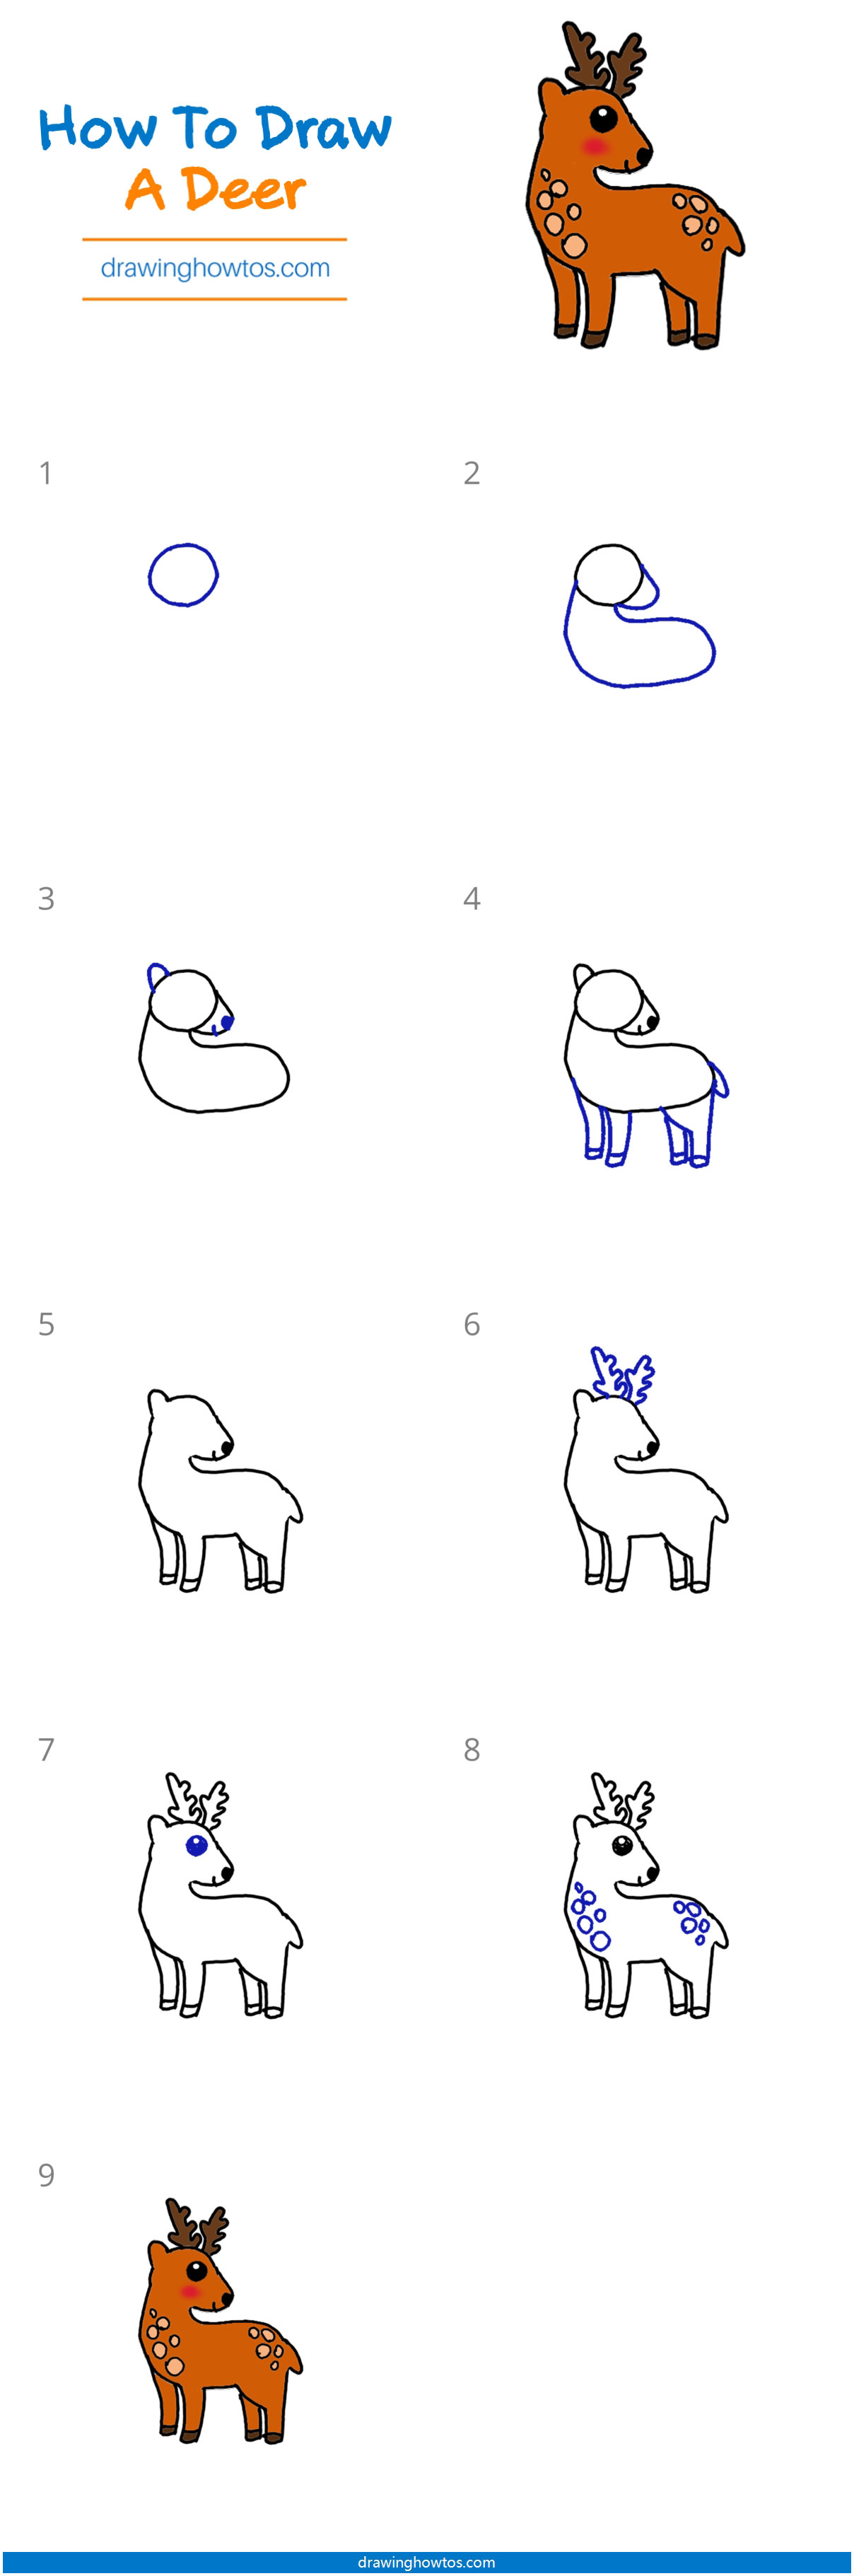 How to Draw a Deer - Step by Step Easy Drawing Guides - Drawing Howtos